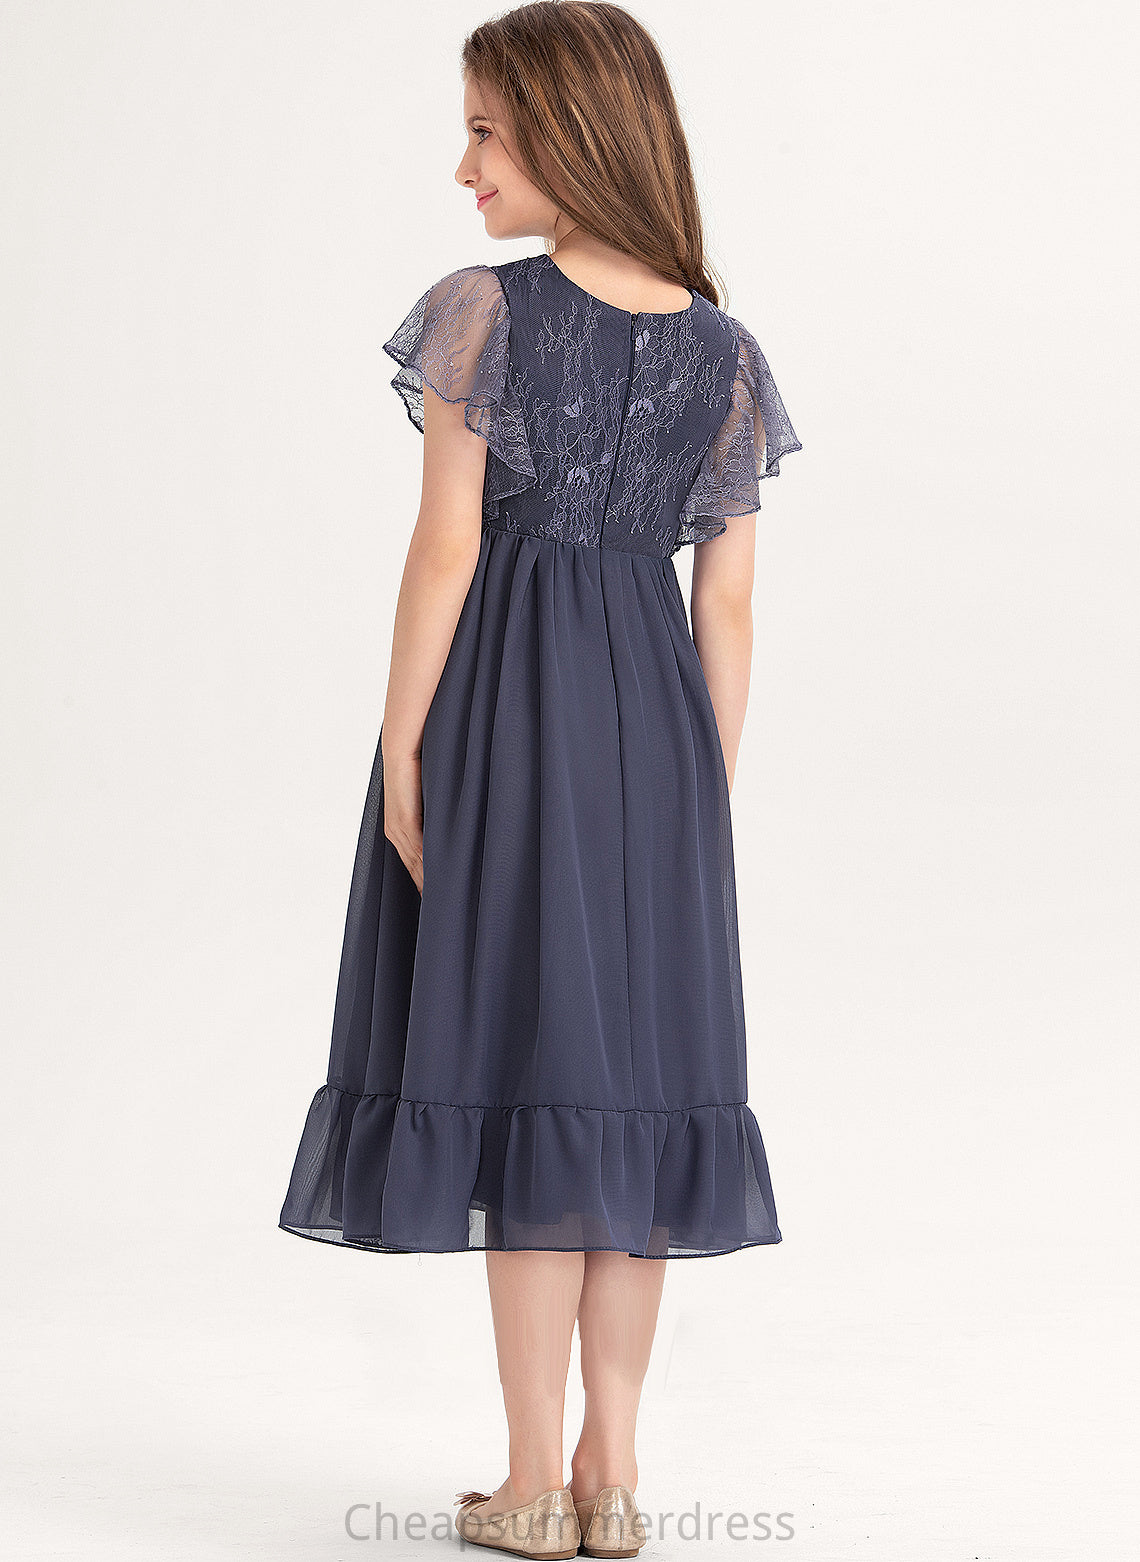 Neck Ruffles Cascading With Jayden Lace A-Line Scoop Knee-Length Junior Bridesmaid Dresses Chiffon